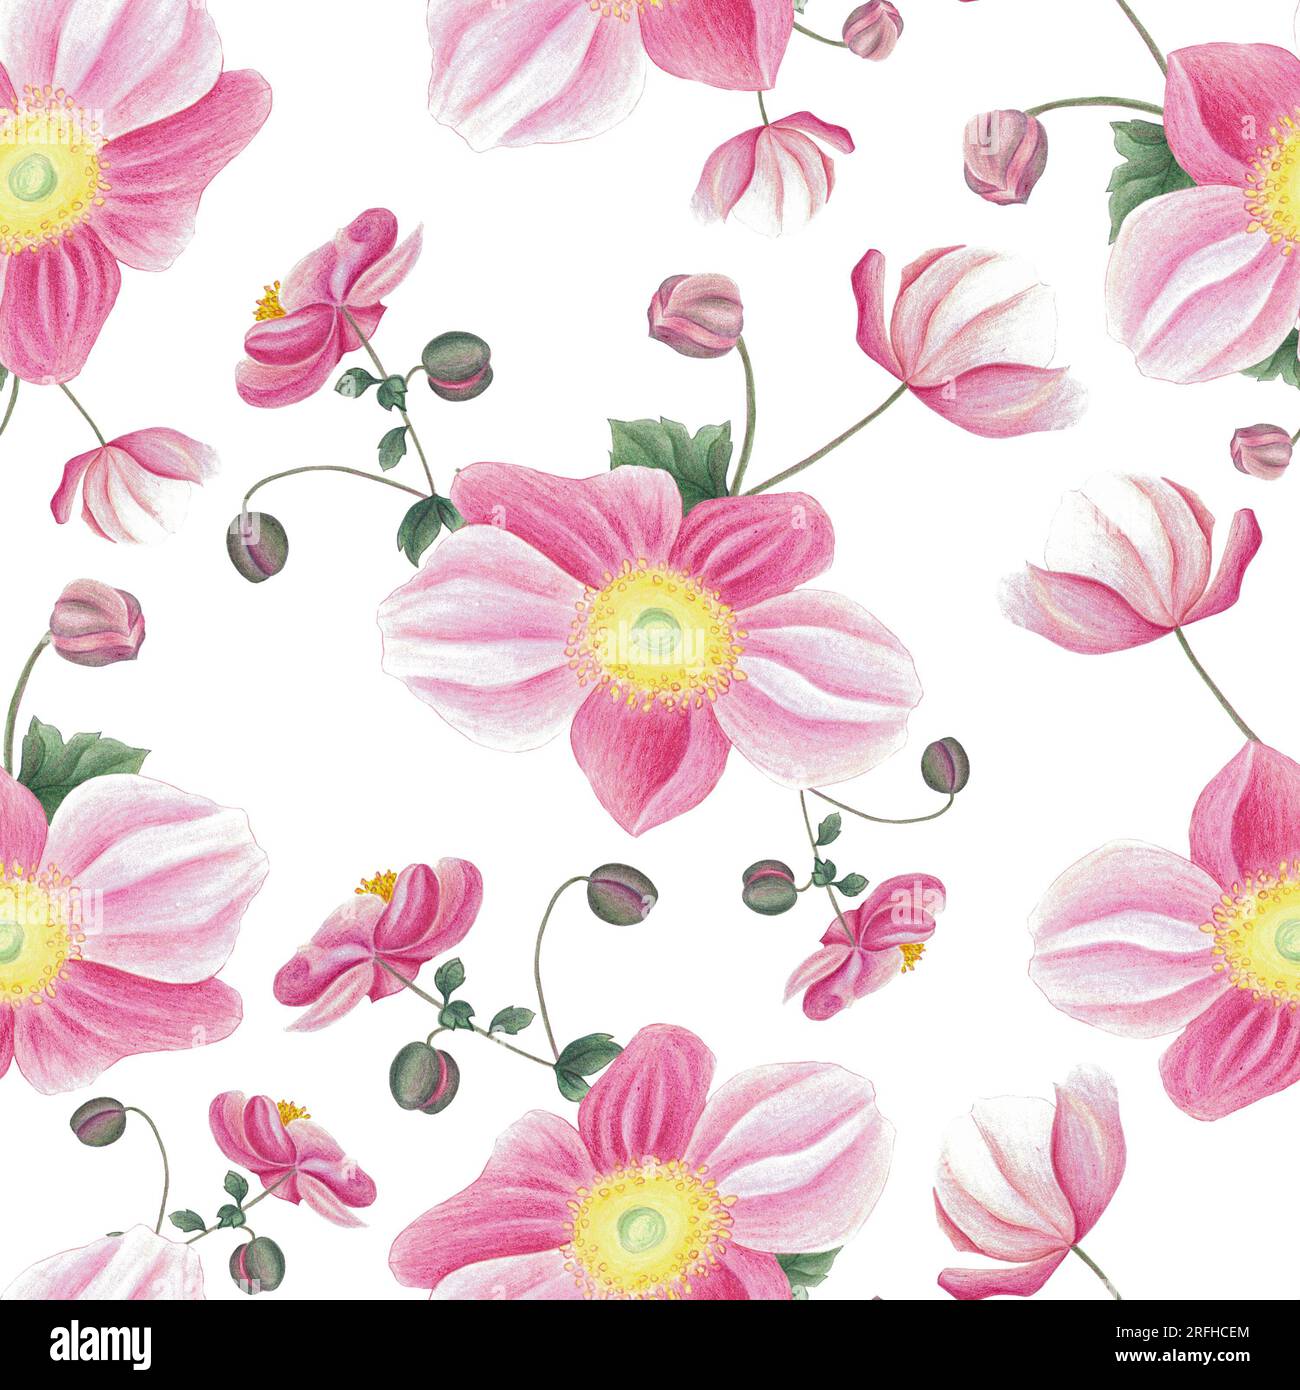 Seamless pattern with pink anemone, leaves and bud. Hand drawn illustration isolated on white. Botanical background for fabric, wrapping paper Stock Photo